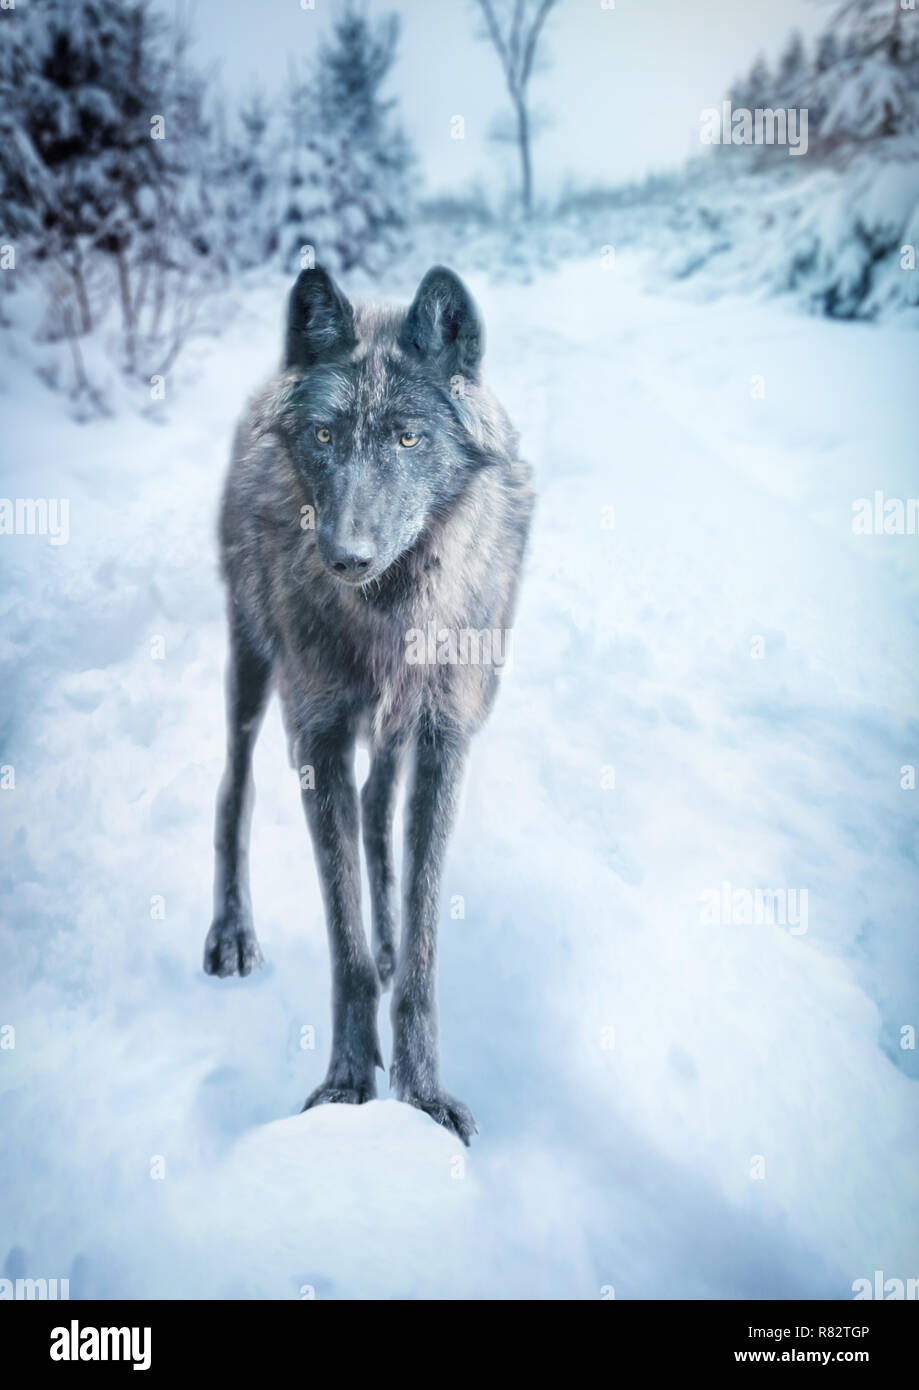 A wild wolf of the Timberwolf breed stands in snowy winter landscape Stock Photo